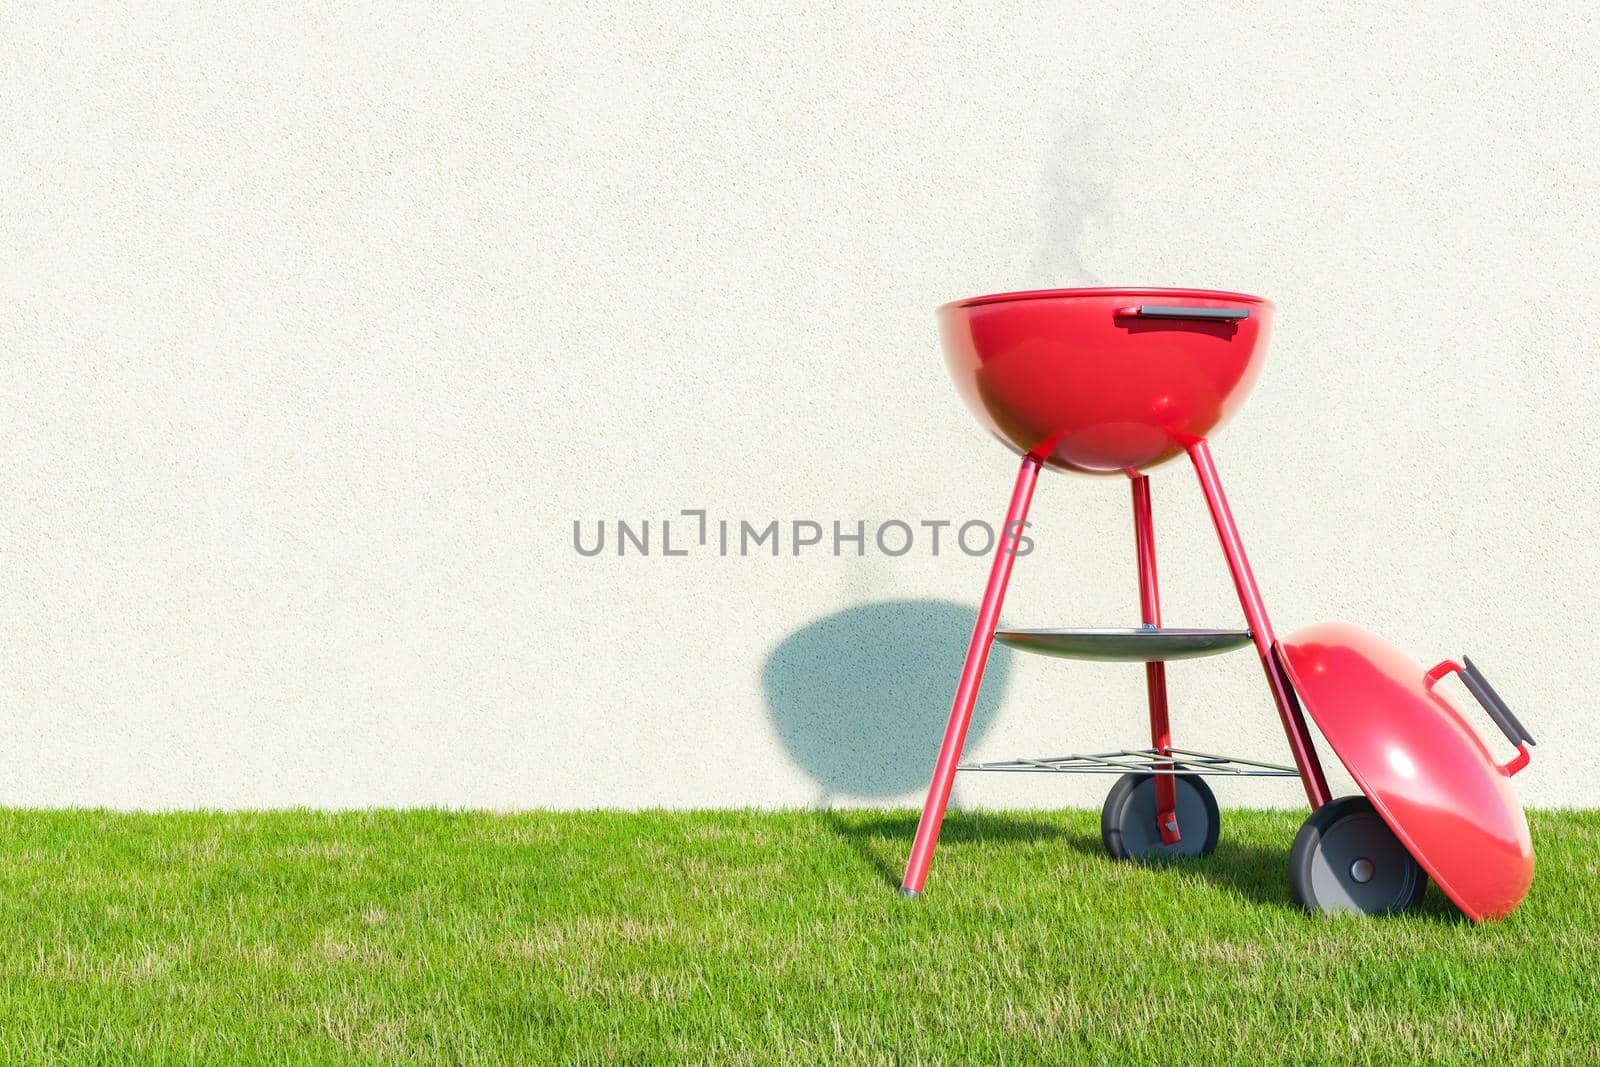 Outdoor charcoal BBQ stove placed on grassy lawn by asolano